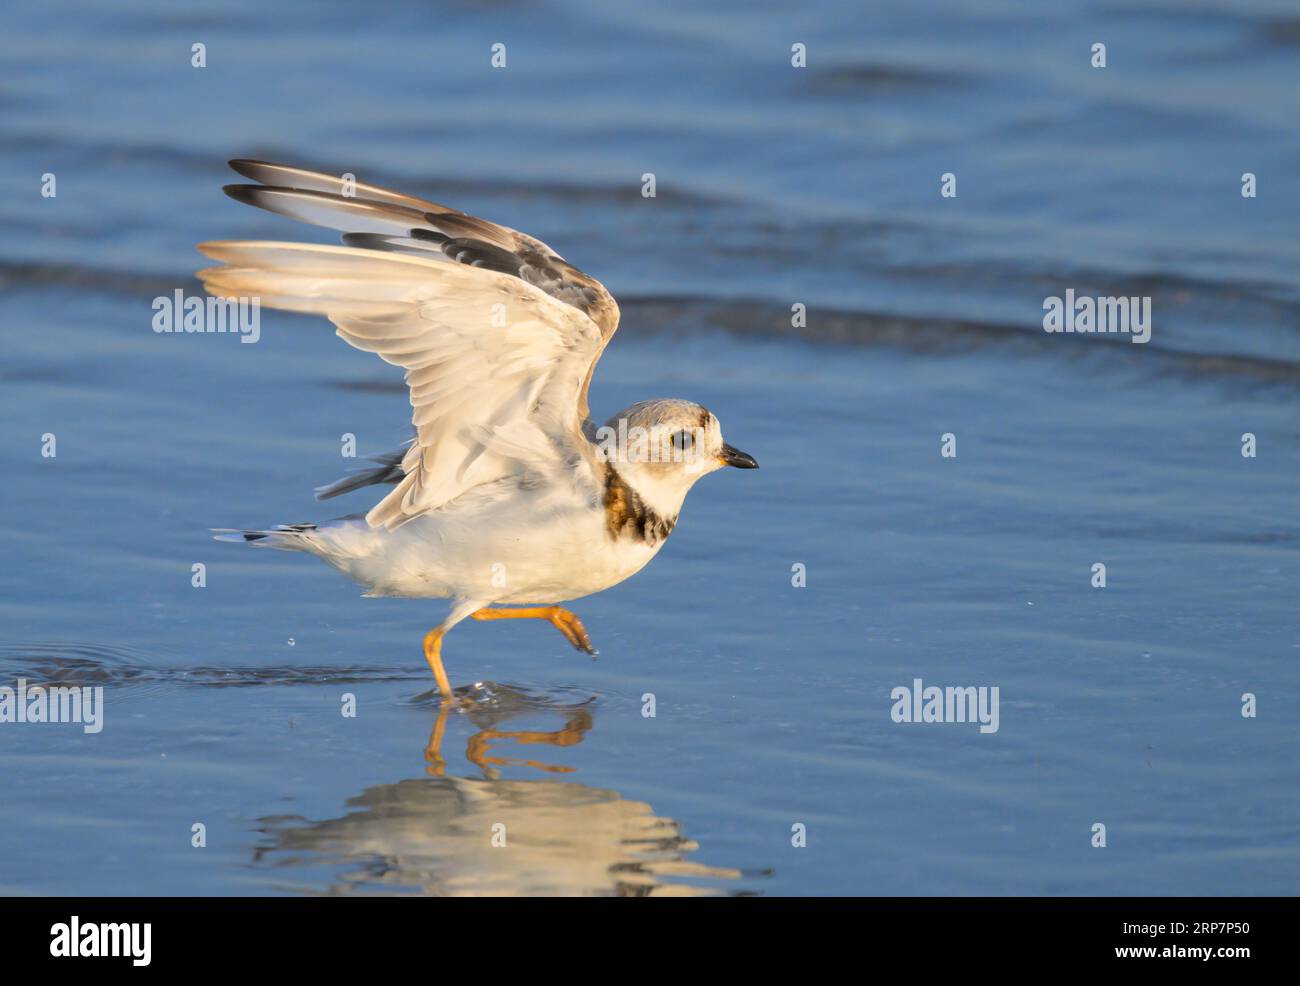 Piping plover (Charadrius melodus) taking off at the ocean coast during fall migration, Galveston, Texas, USA. Stock Photo